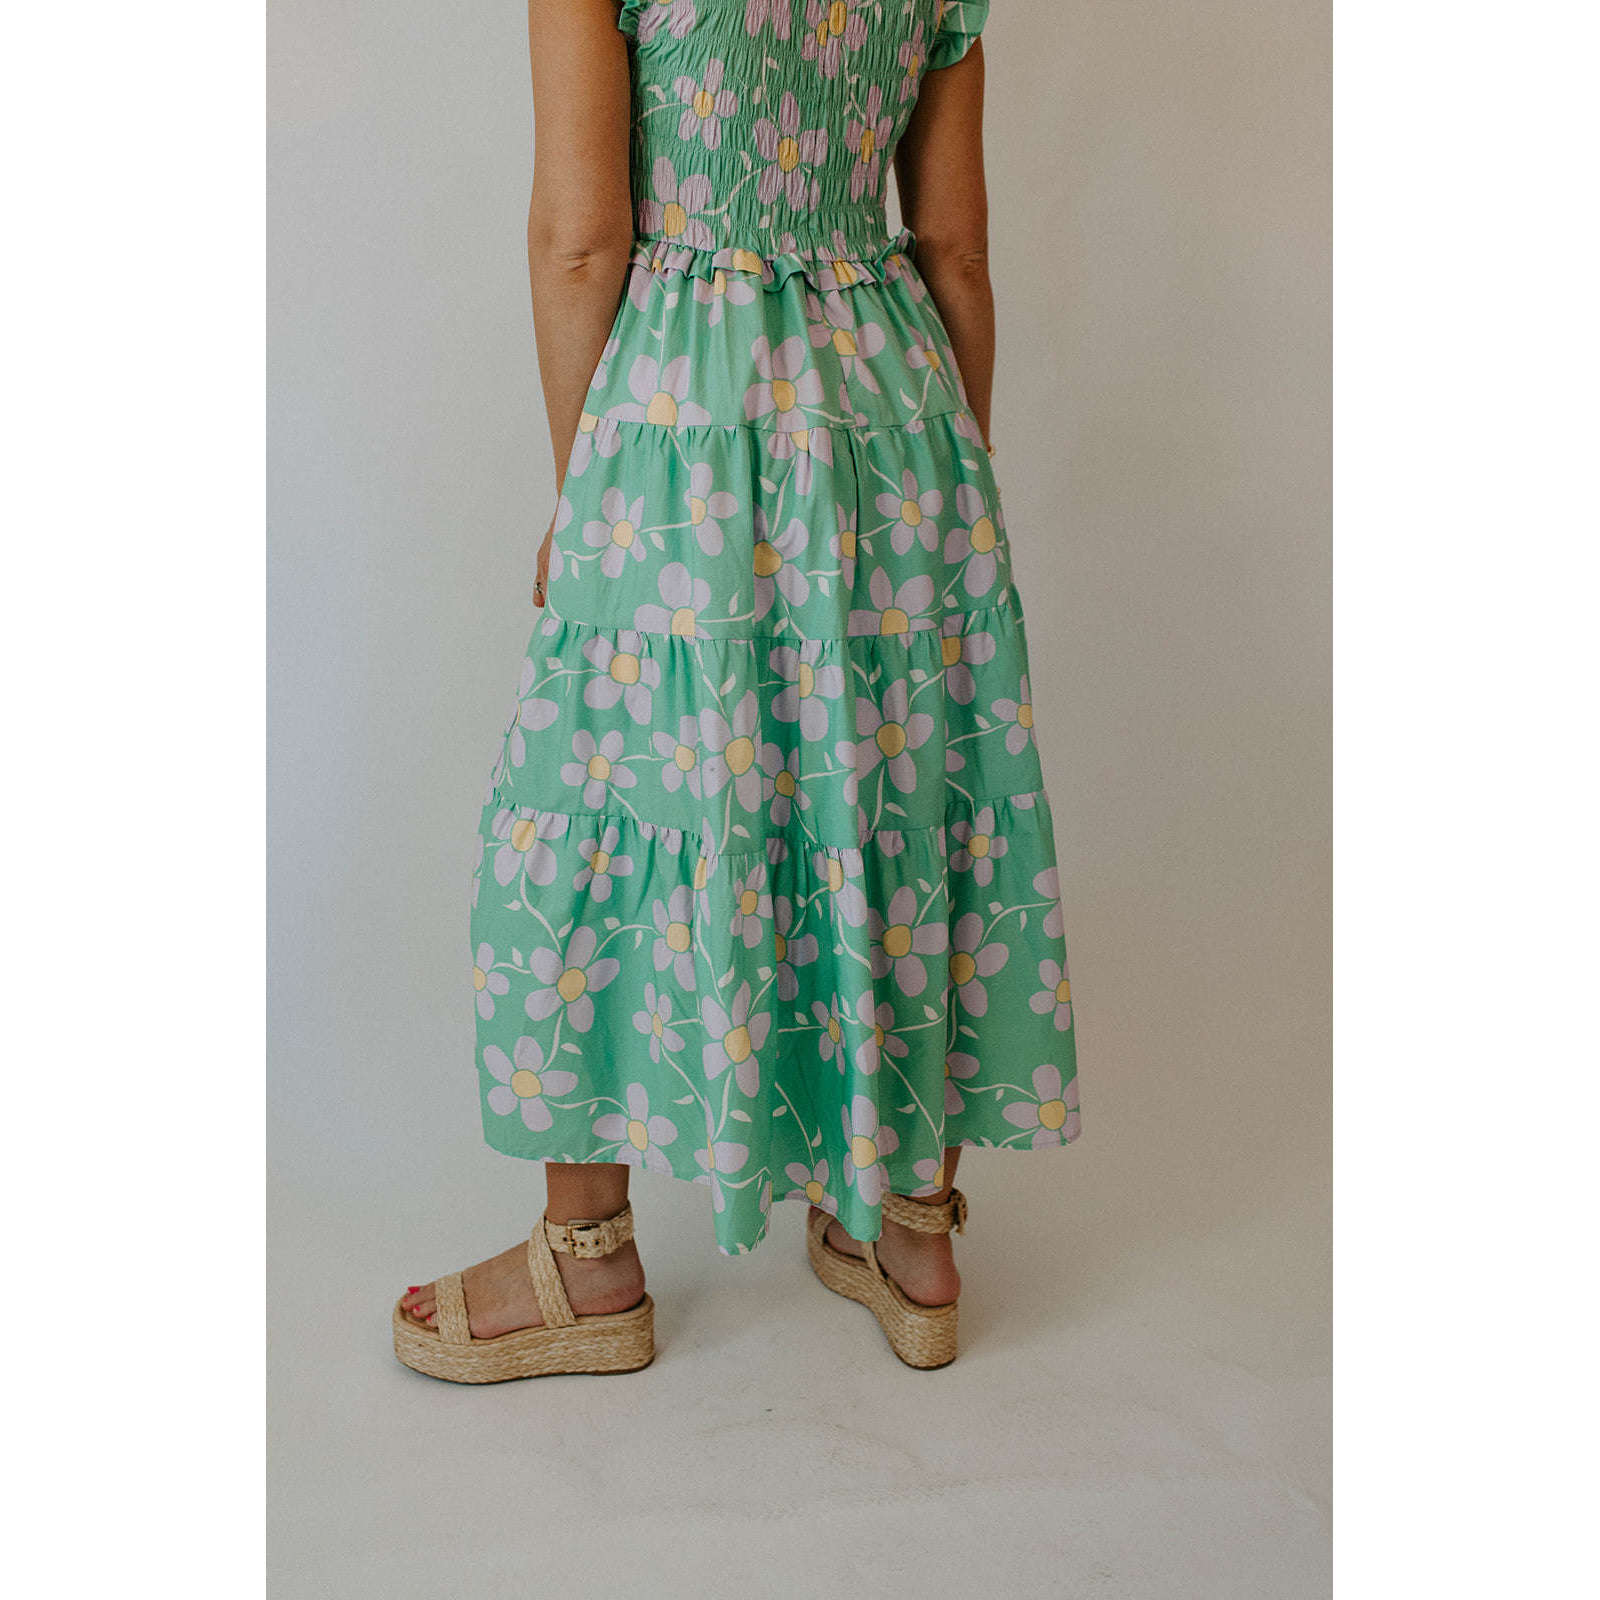 8.28 Boutique:Karlie Clothes,Karlie Daisy Smocked Tiered Dress,Dress